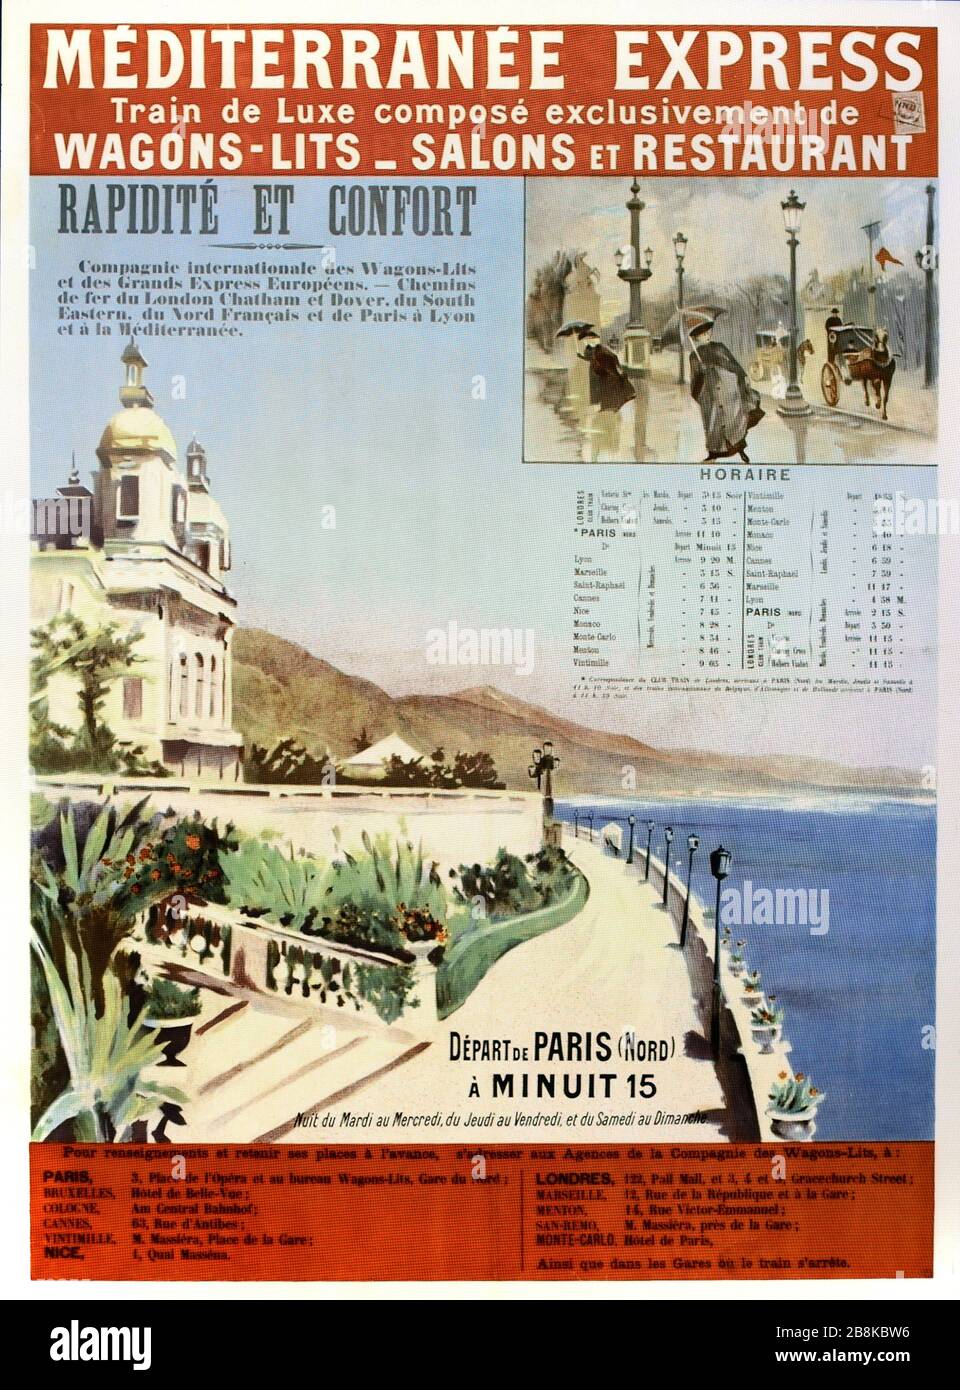 Vintage Advert for PLM French Railways from Paris to Monte Carlo Monaco by Night Train. Old Poster, Advert or Illustration from Early c20th. Stock Photo